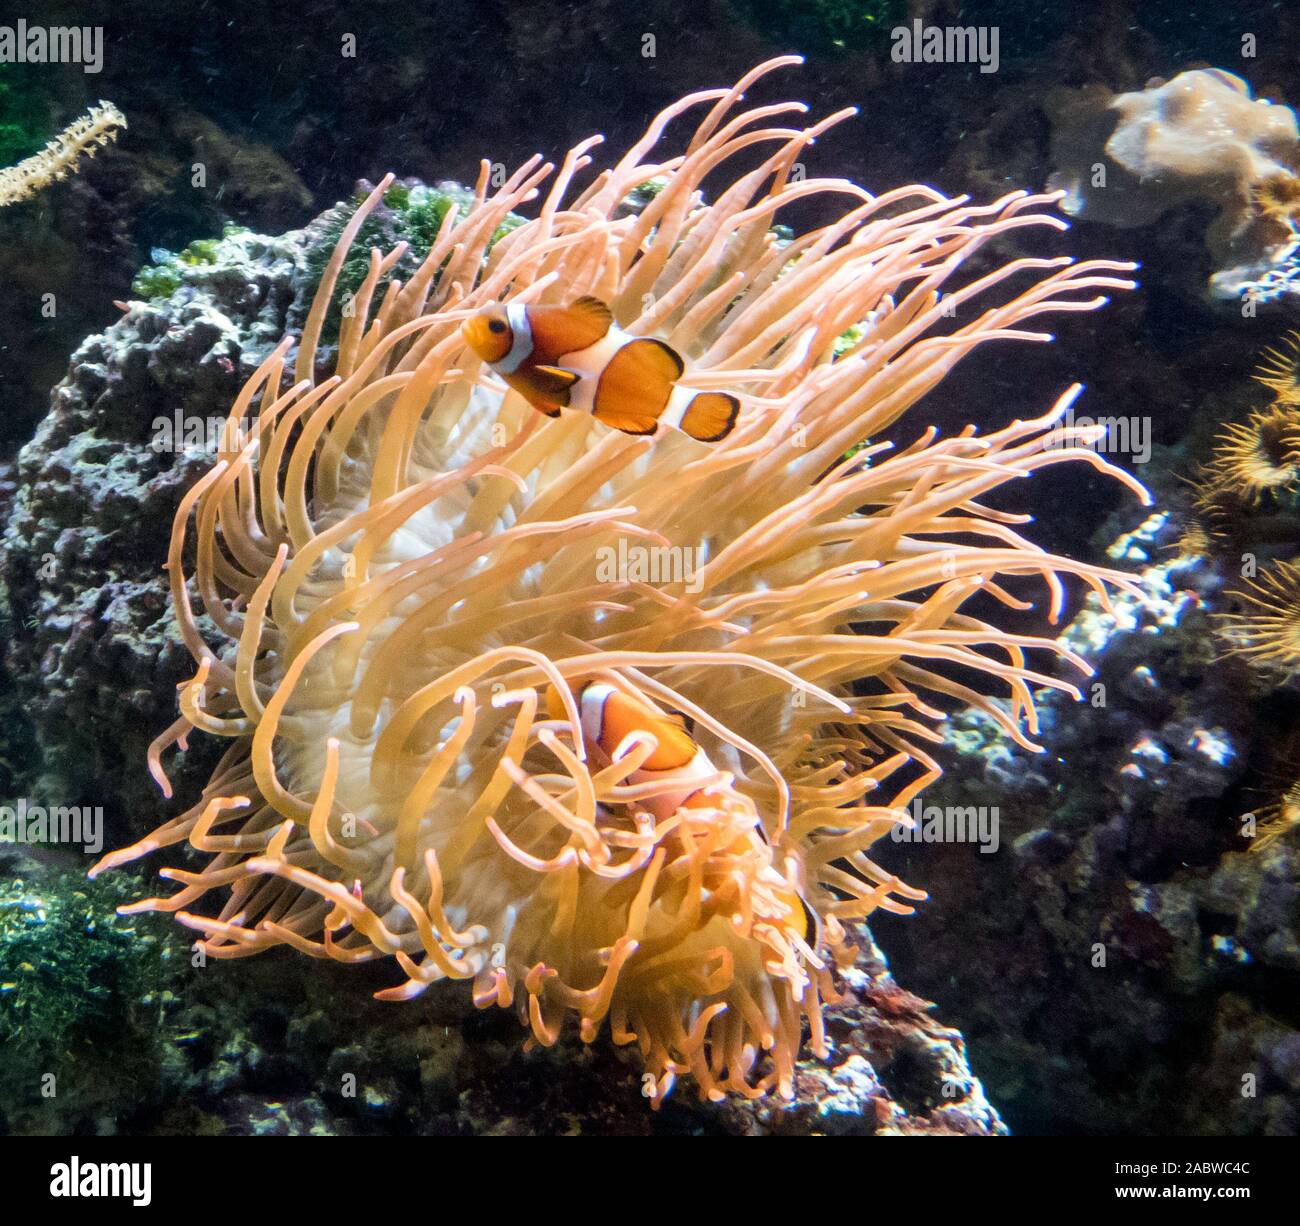 Anemonenfische, Amphiprion Stock Photo